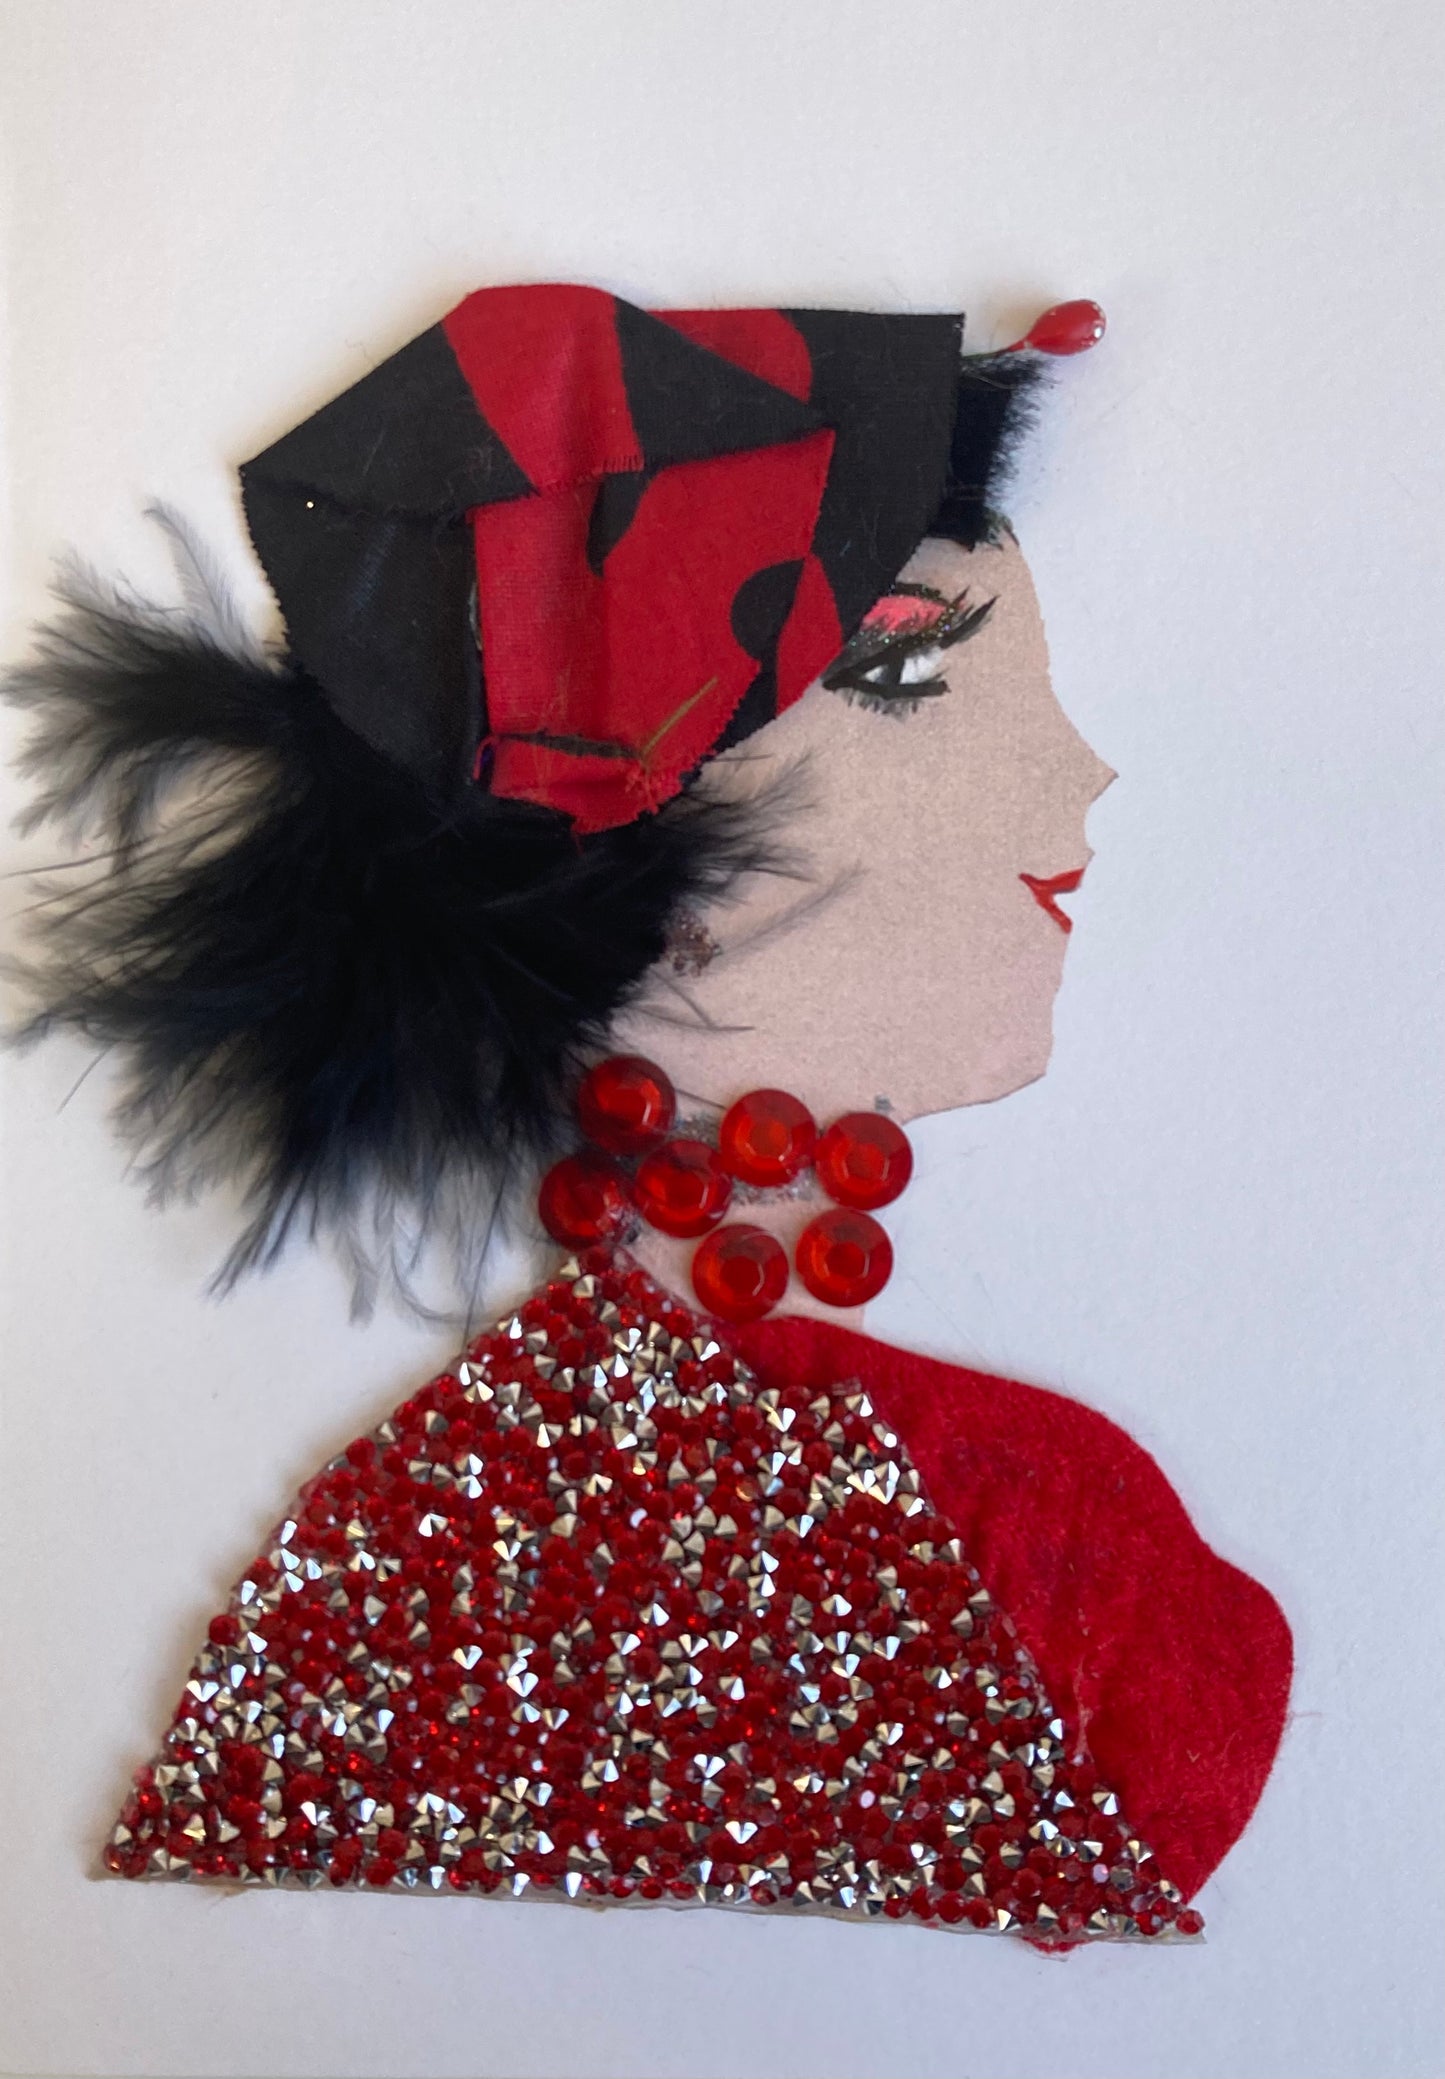 This card has been given the name Helvetica. She wears a blouse made of red and silver diamantés, a necklace made of red gems, and a small red and black headscarf in her feathery black hair. , 